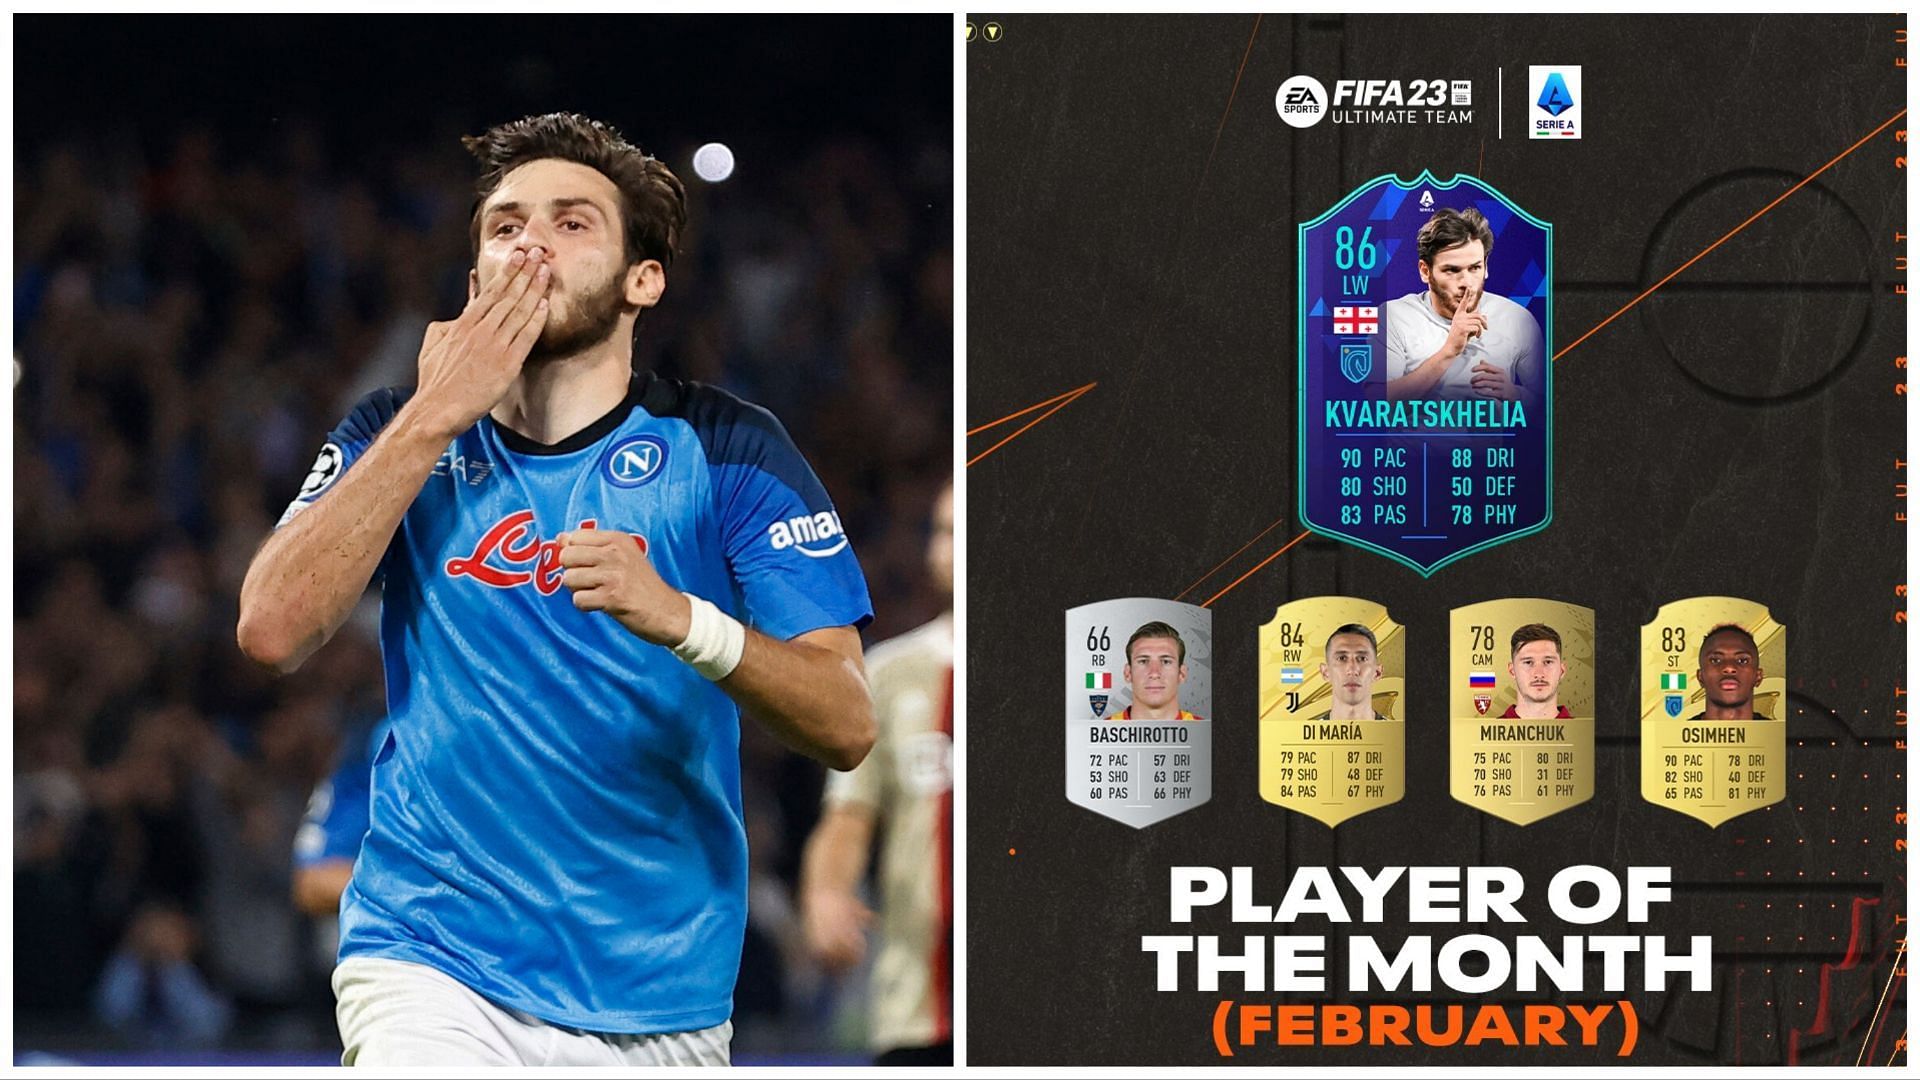 POTM Kvaratskhelia is now available in FIFA 23 (Images via Getty and EA Sports)